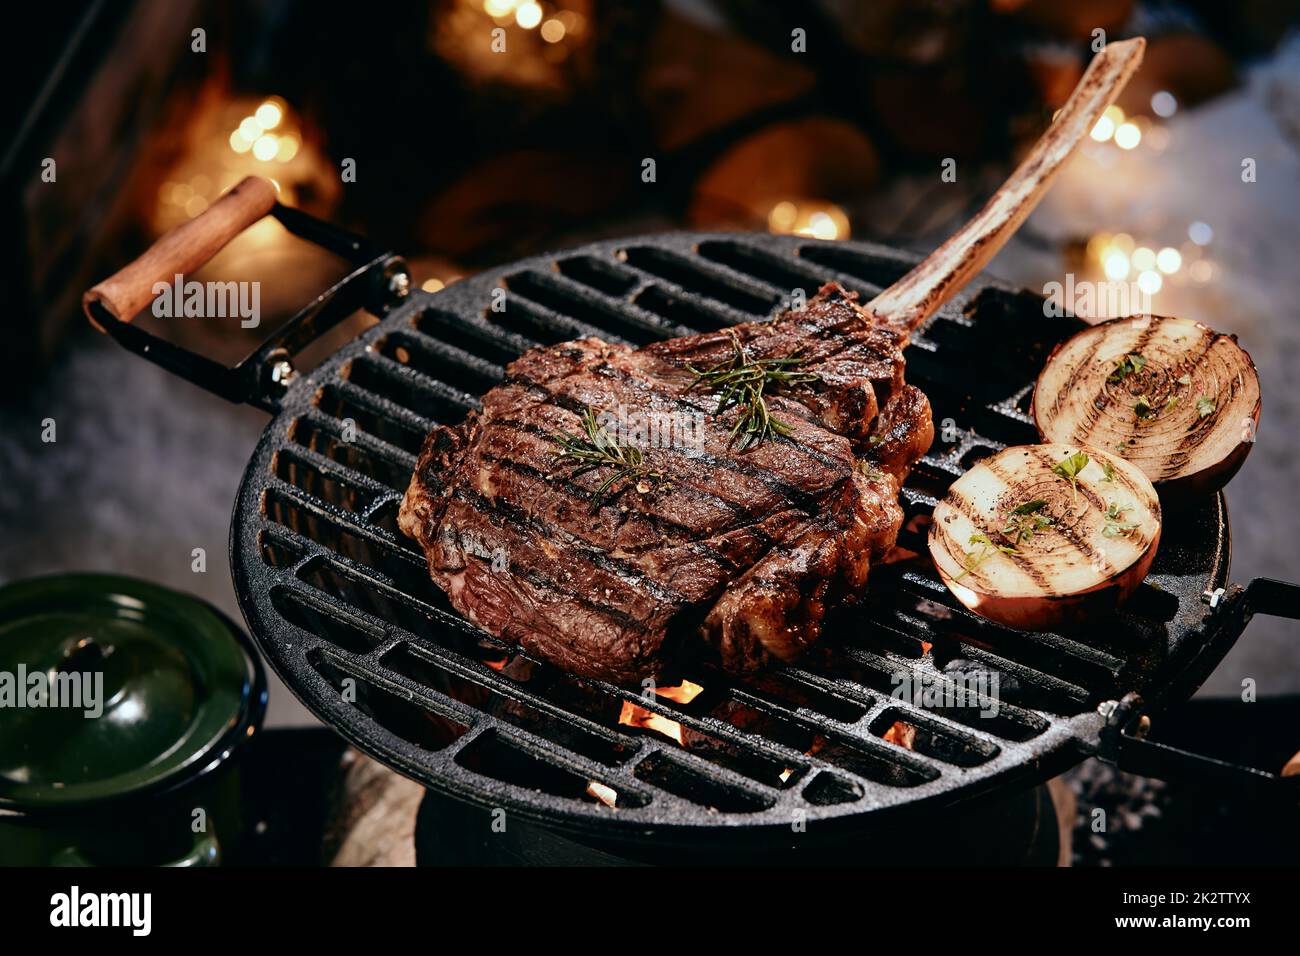 Tomahawk steak cooking on grill rack Stock Photo